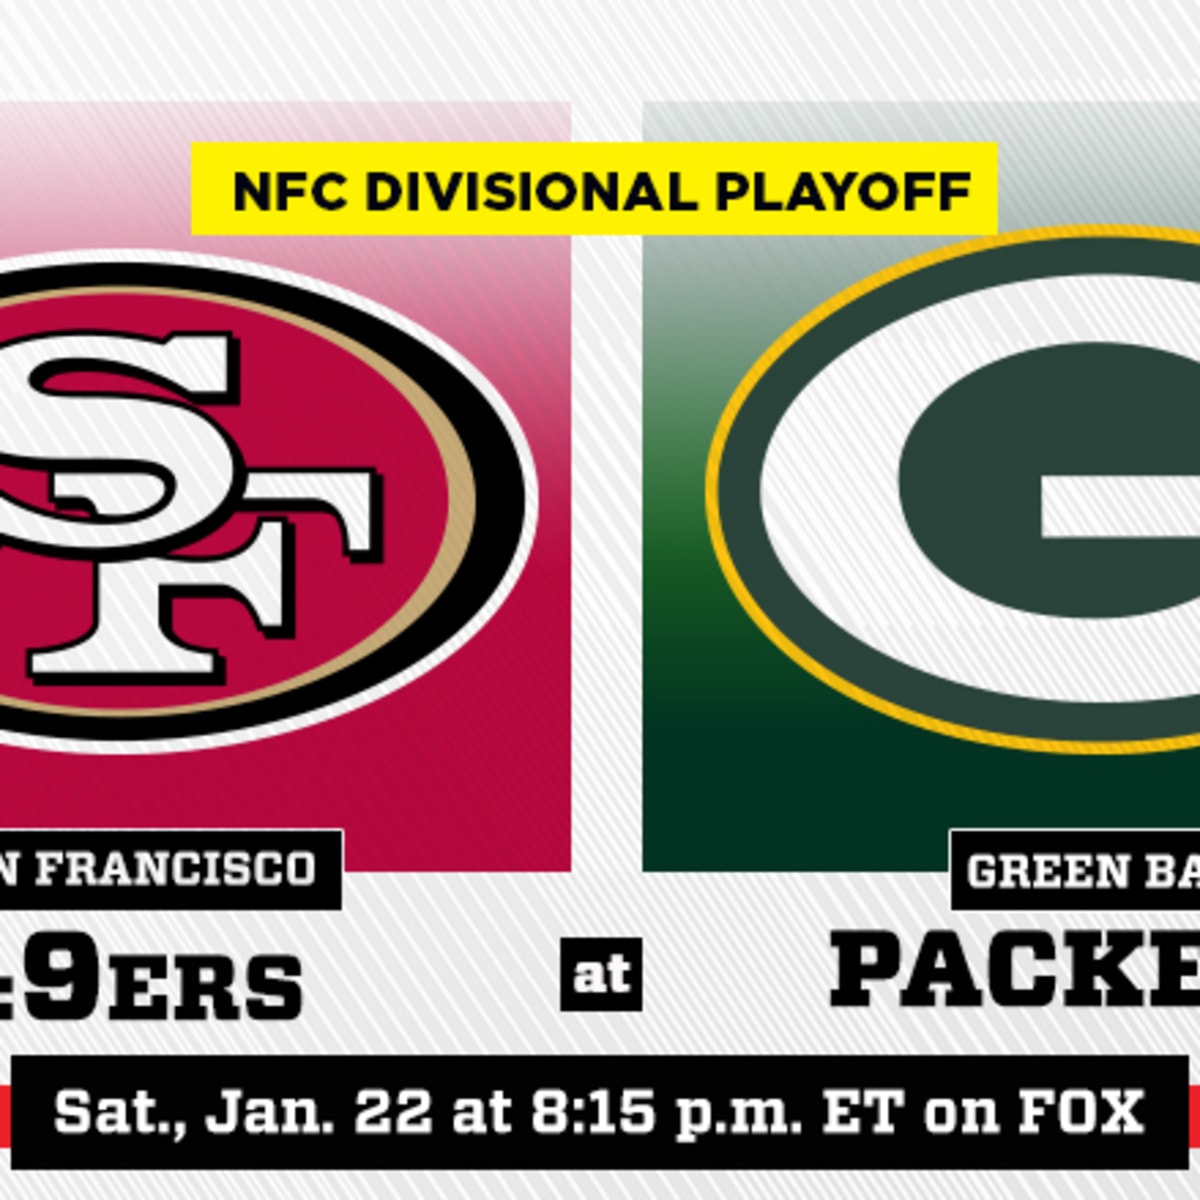 It's Packers vs. 49ers in NFC Championship Game